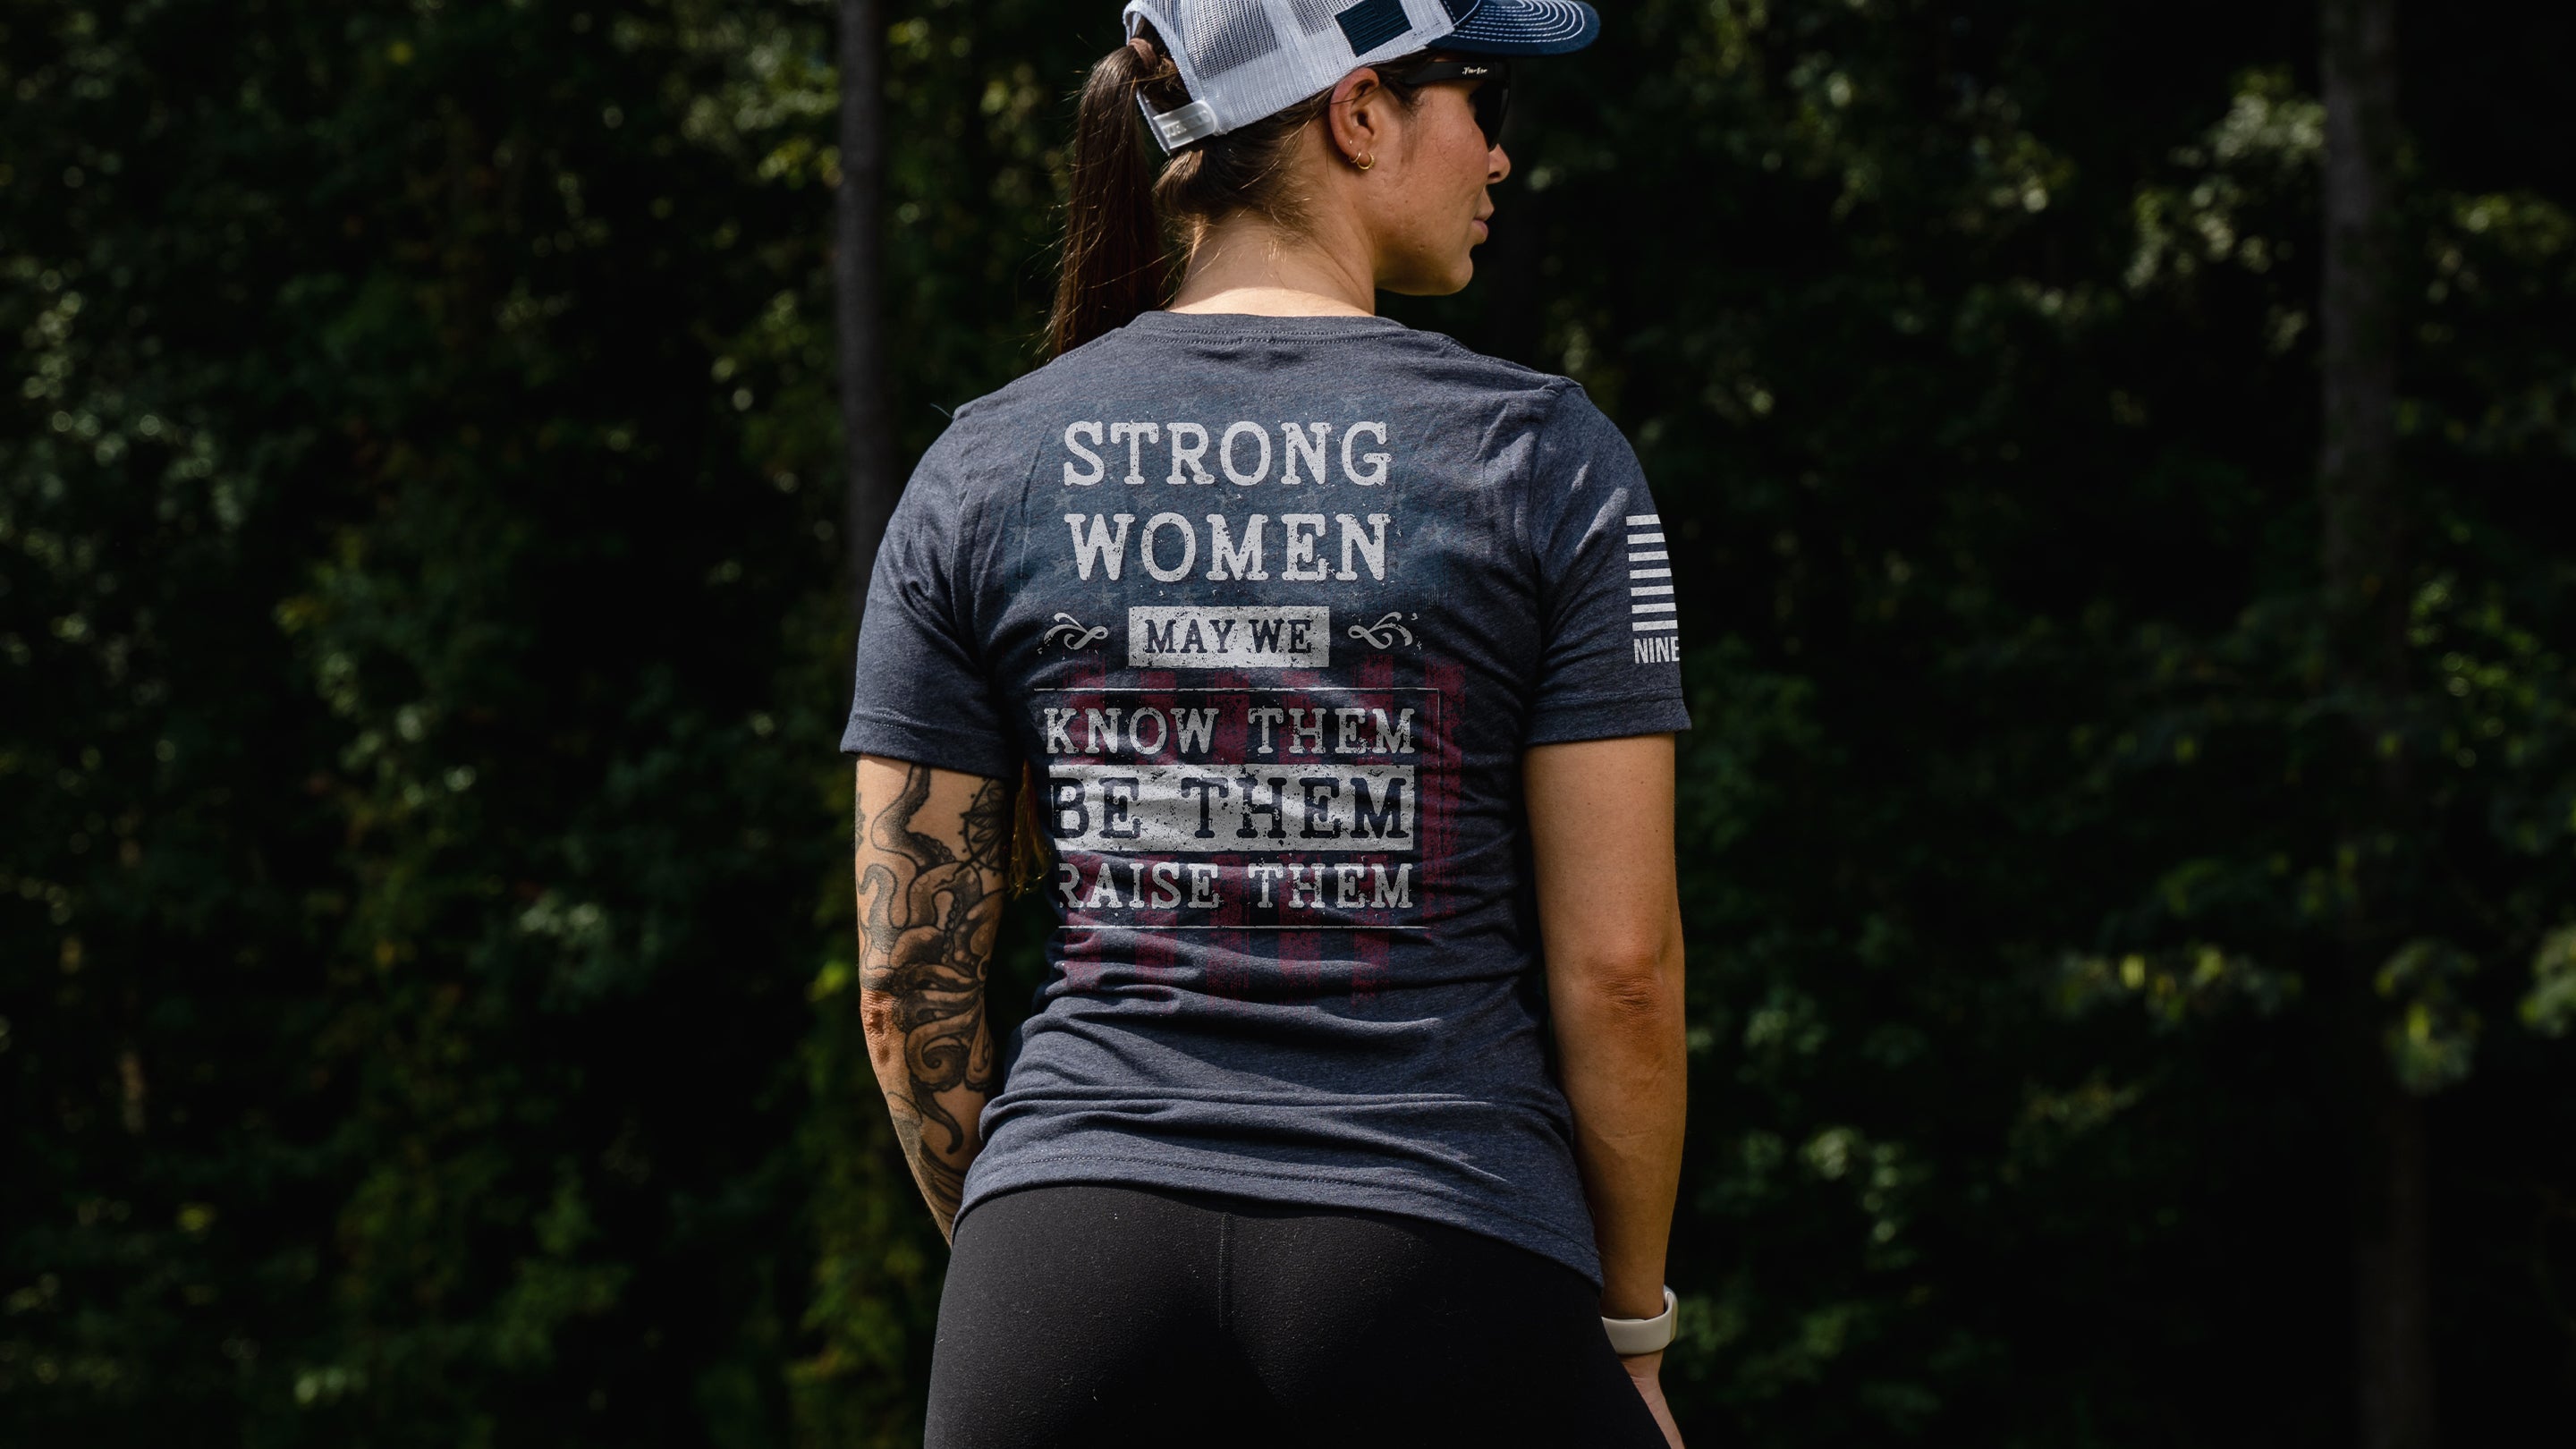 STRONG WOMEN / MAY WE